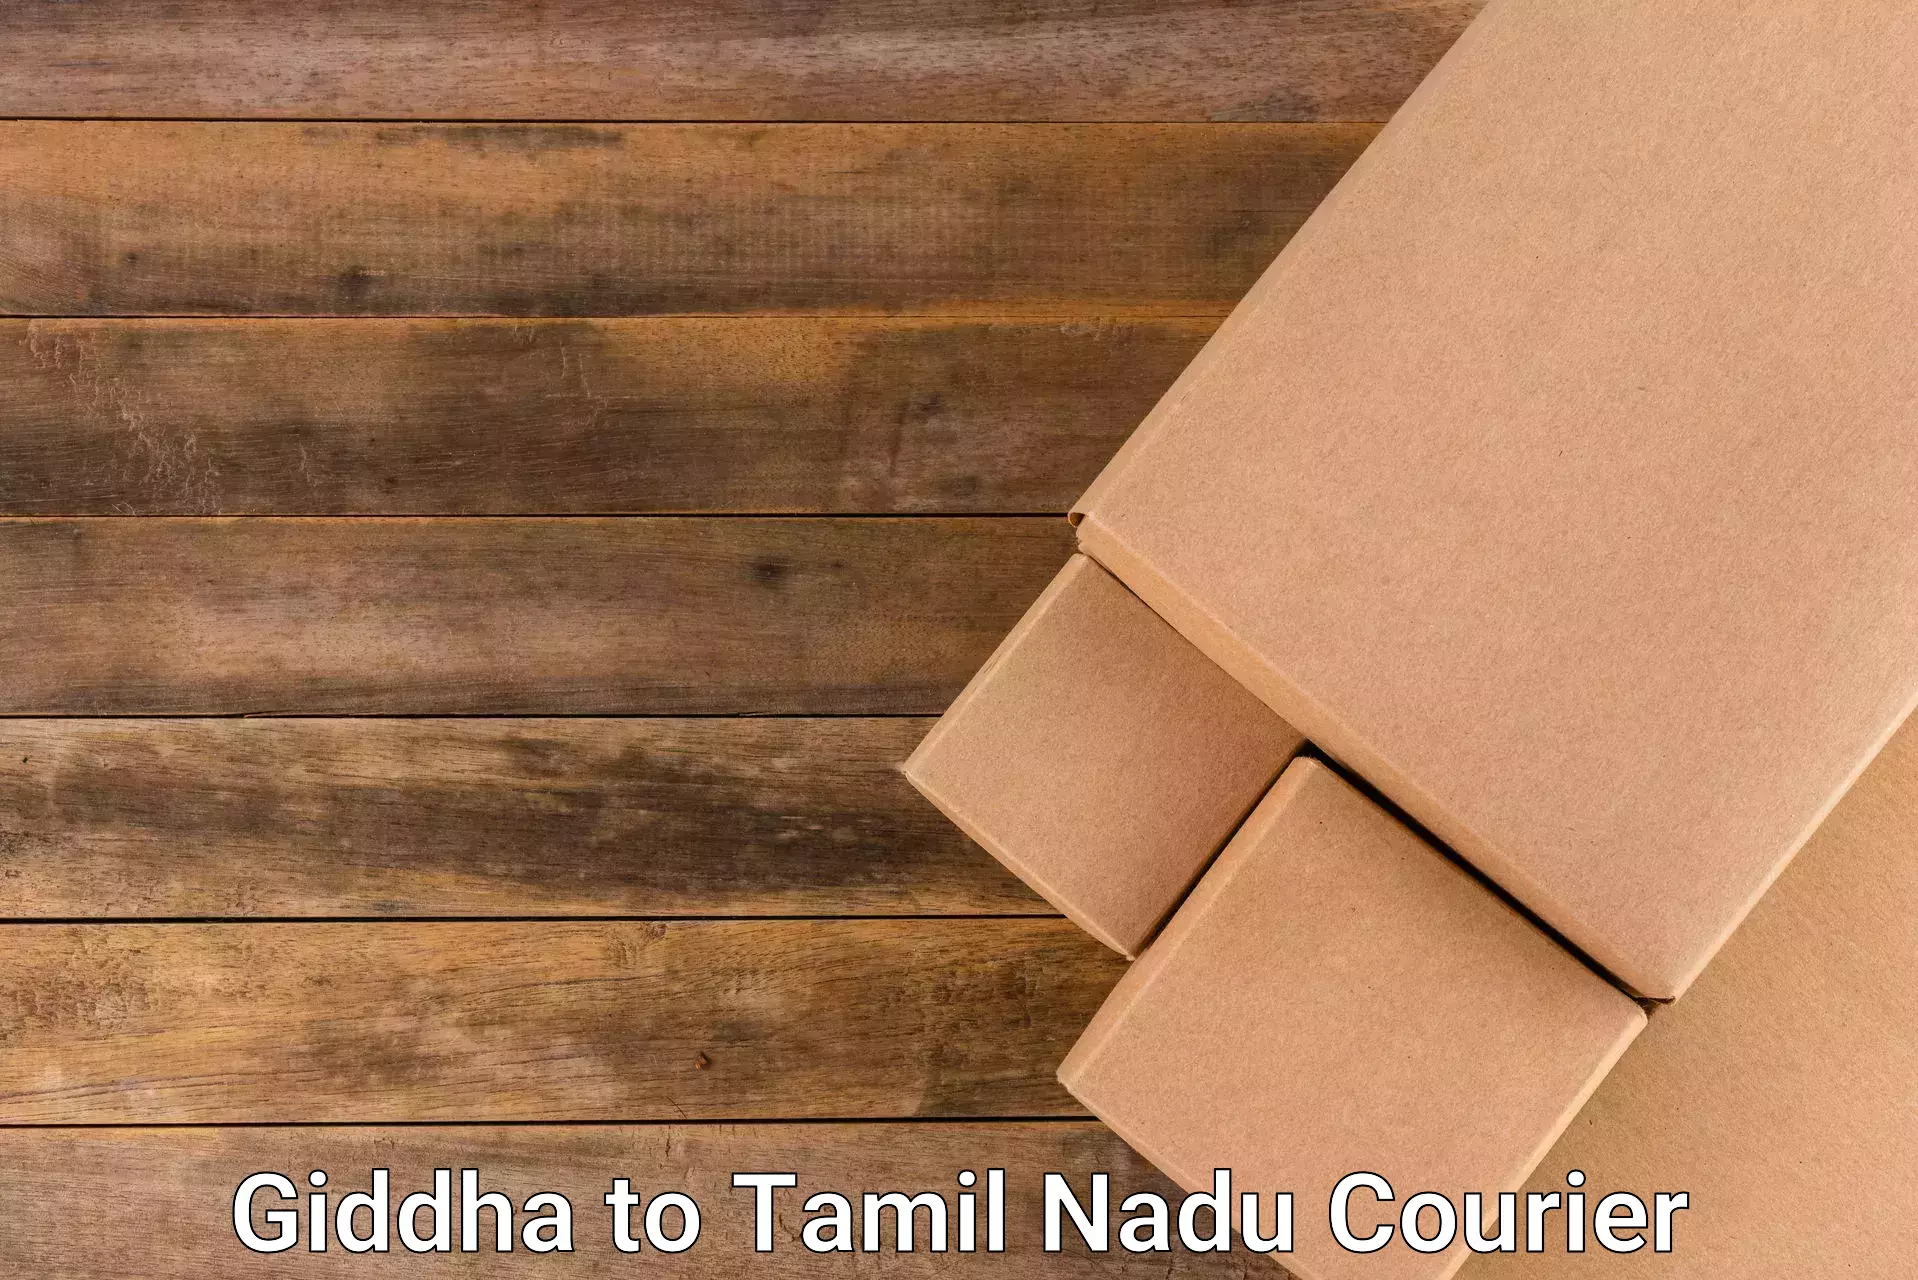 Express package services Giddha to Tamil Nadu